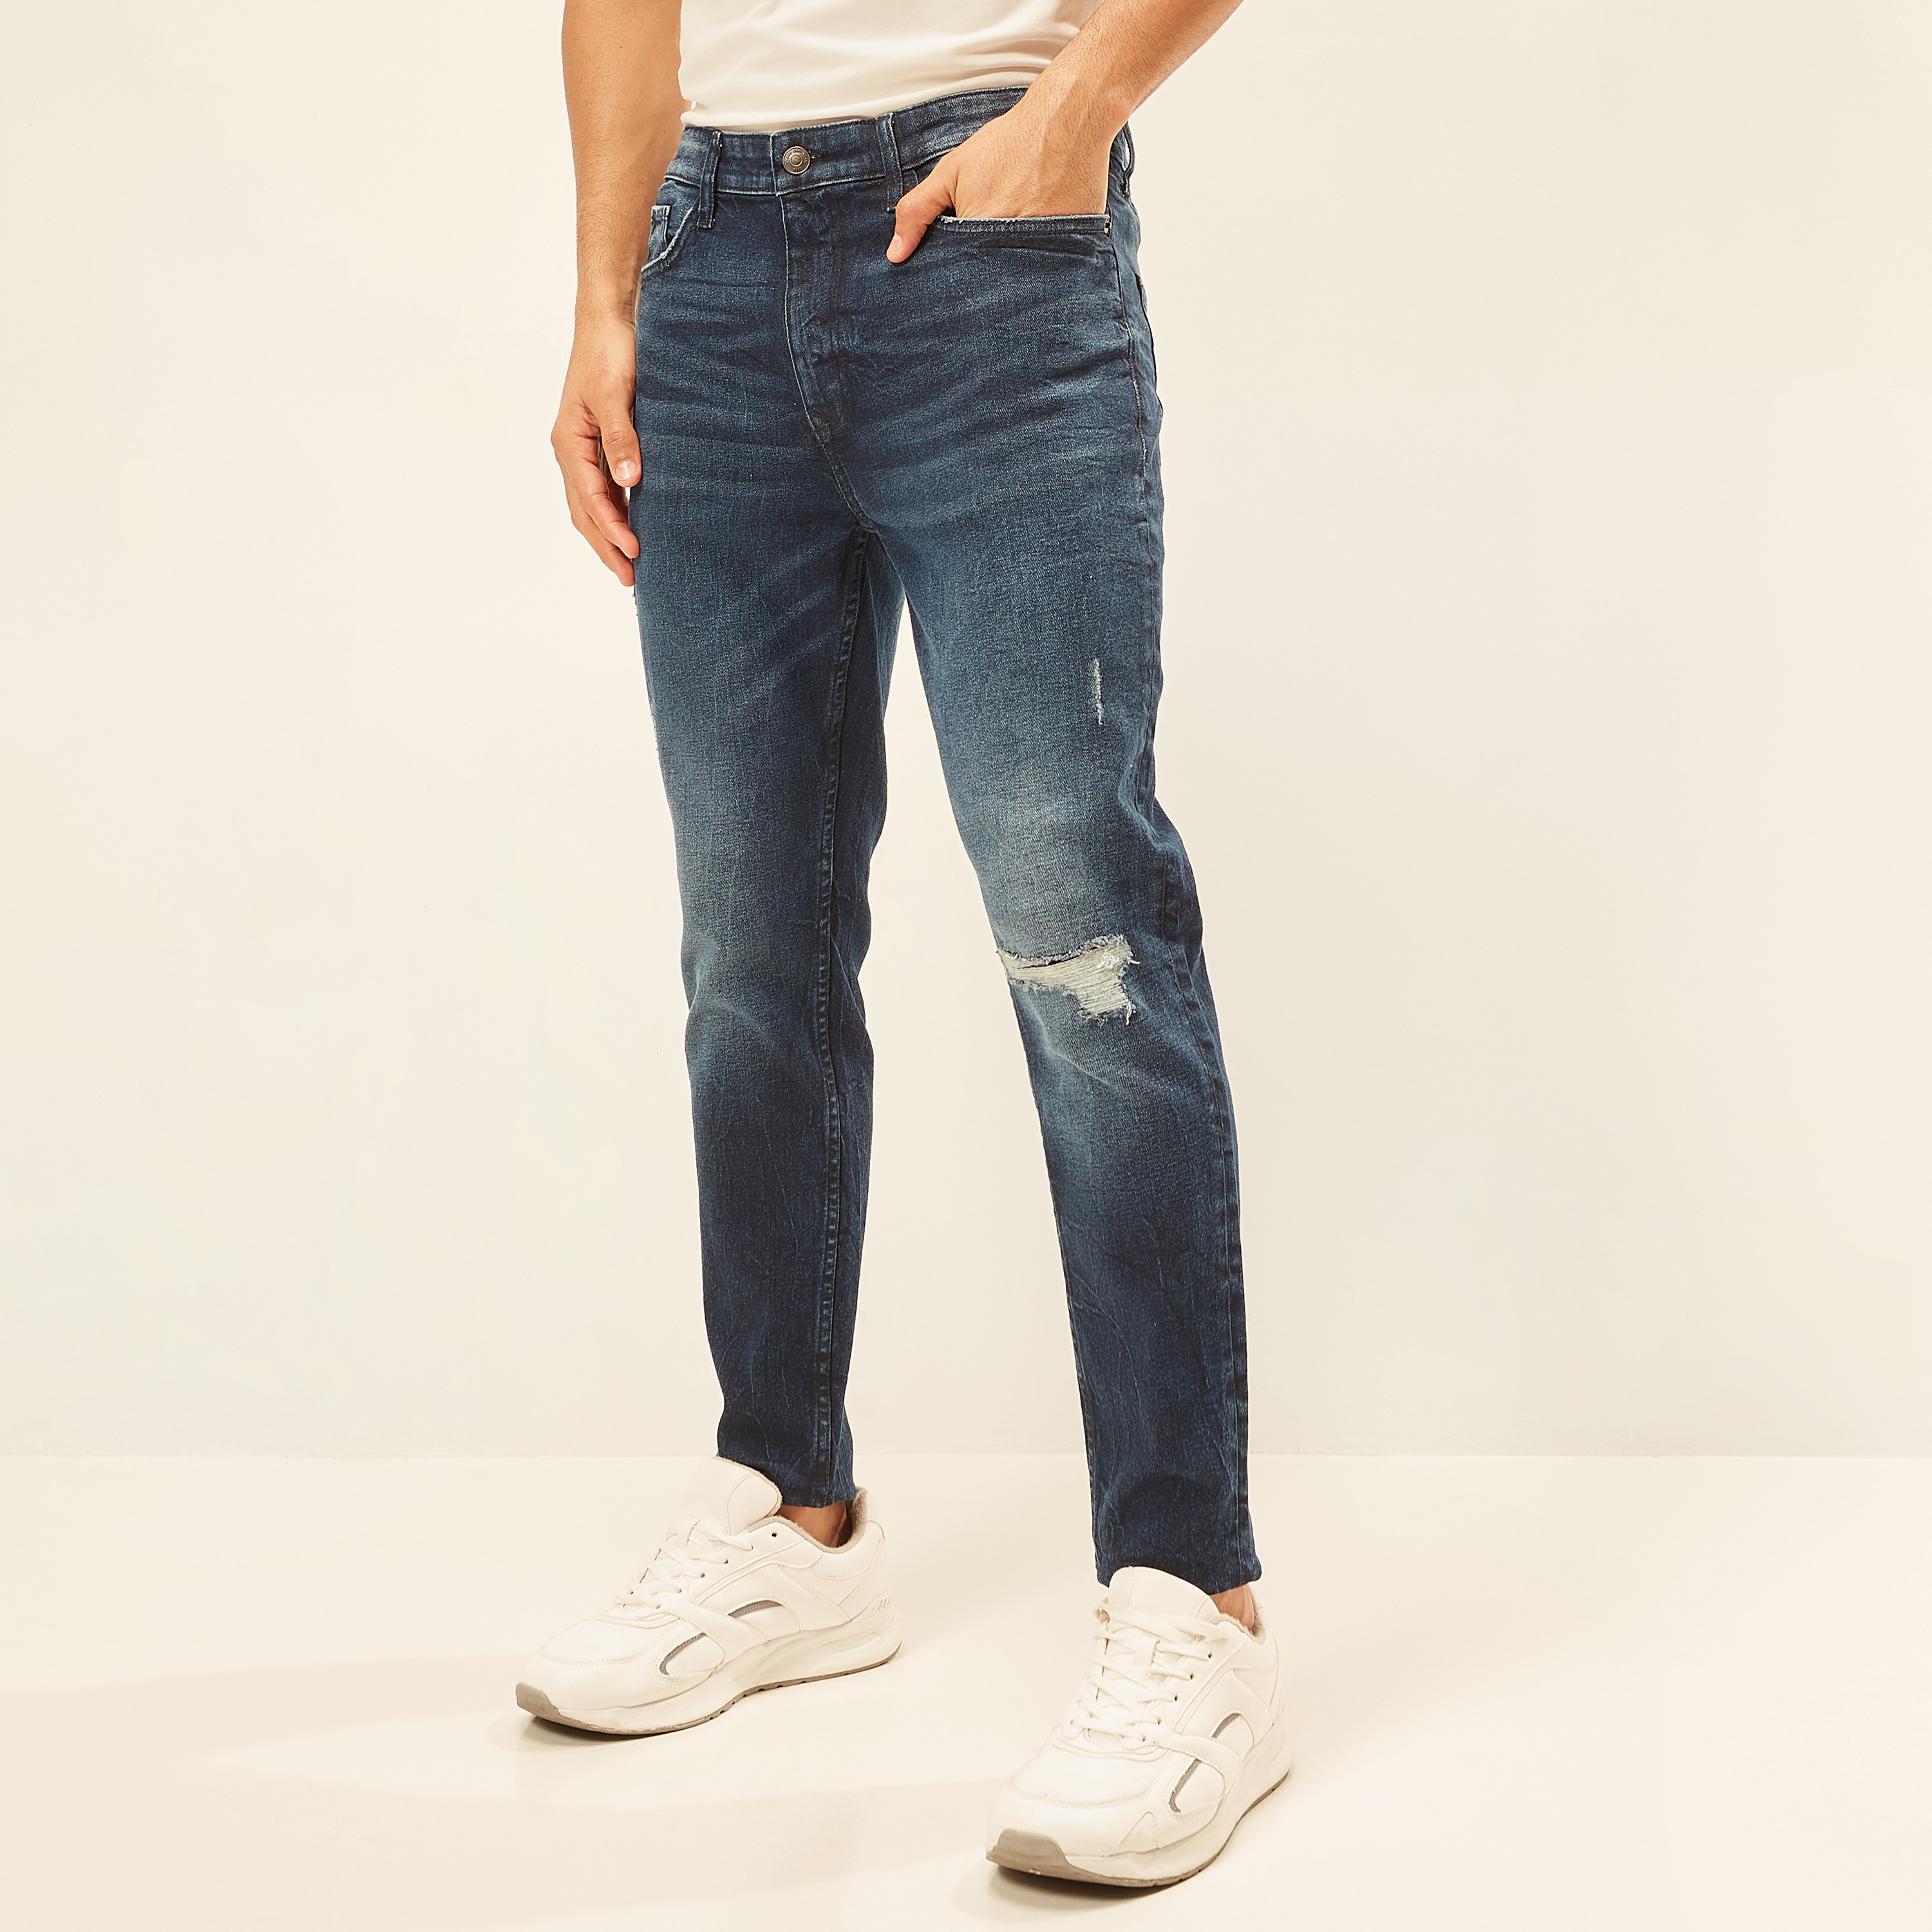 Denim Fit Carrot for Men | Cycle Jeans